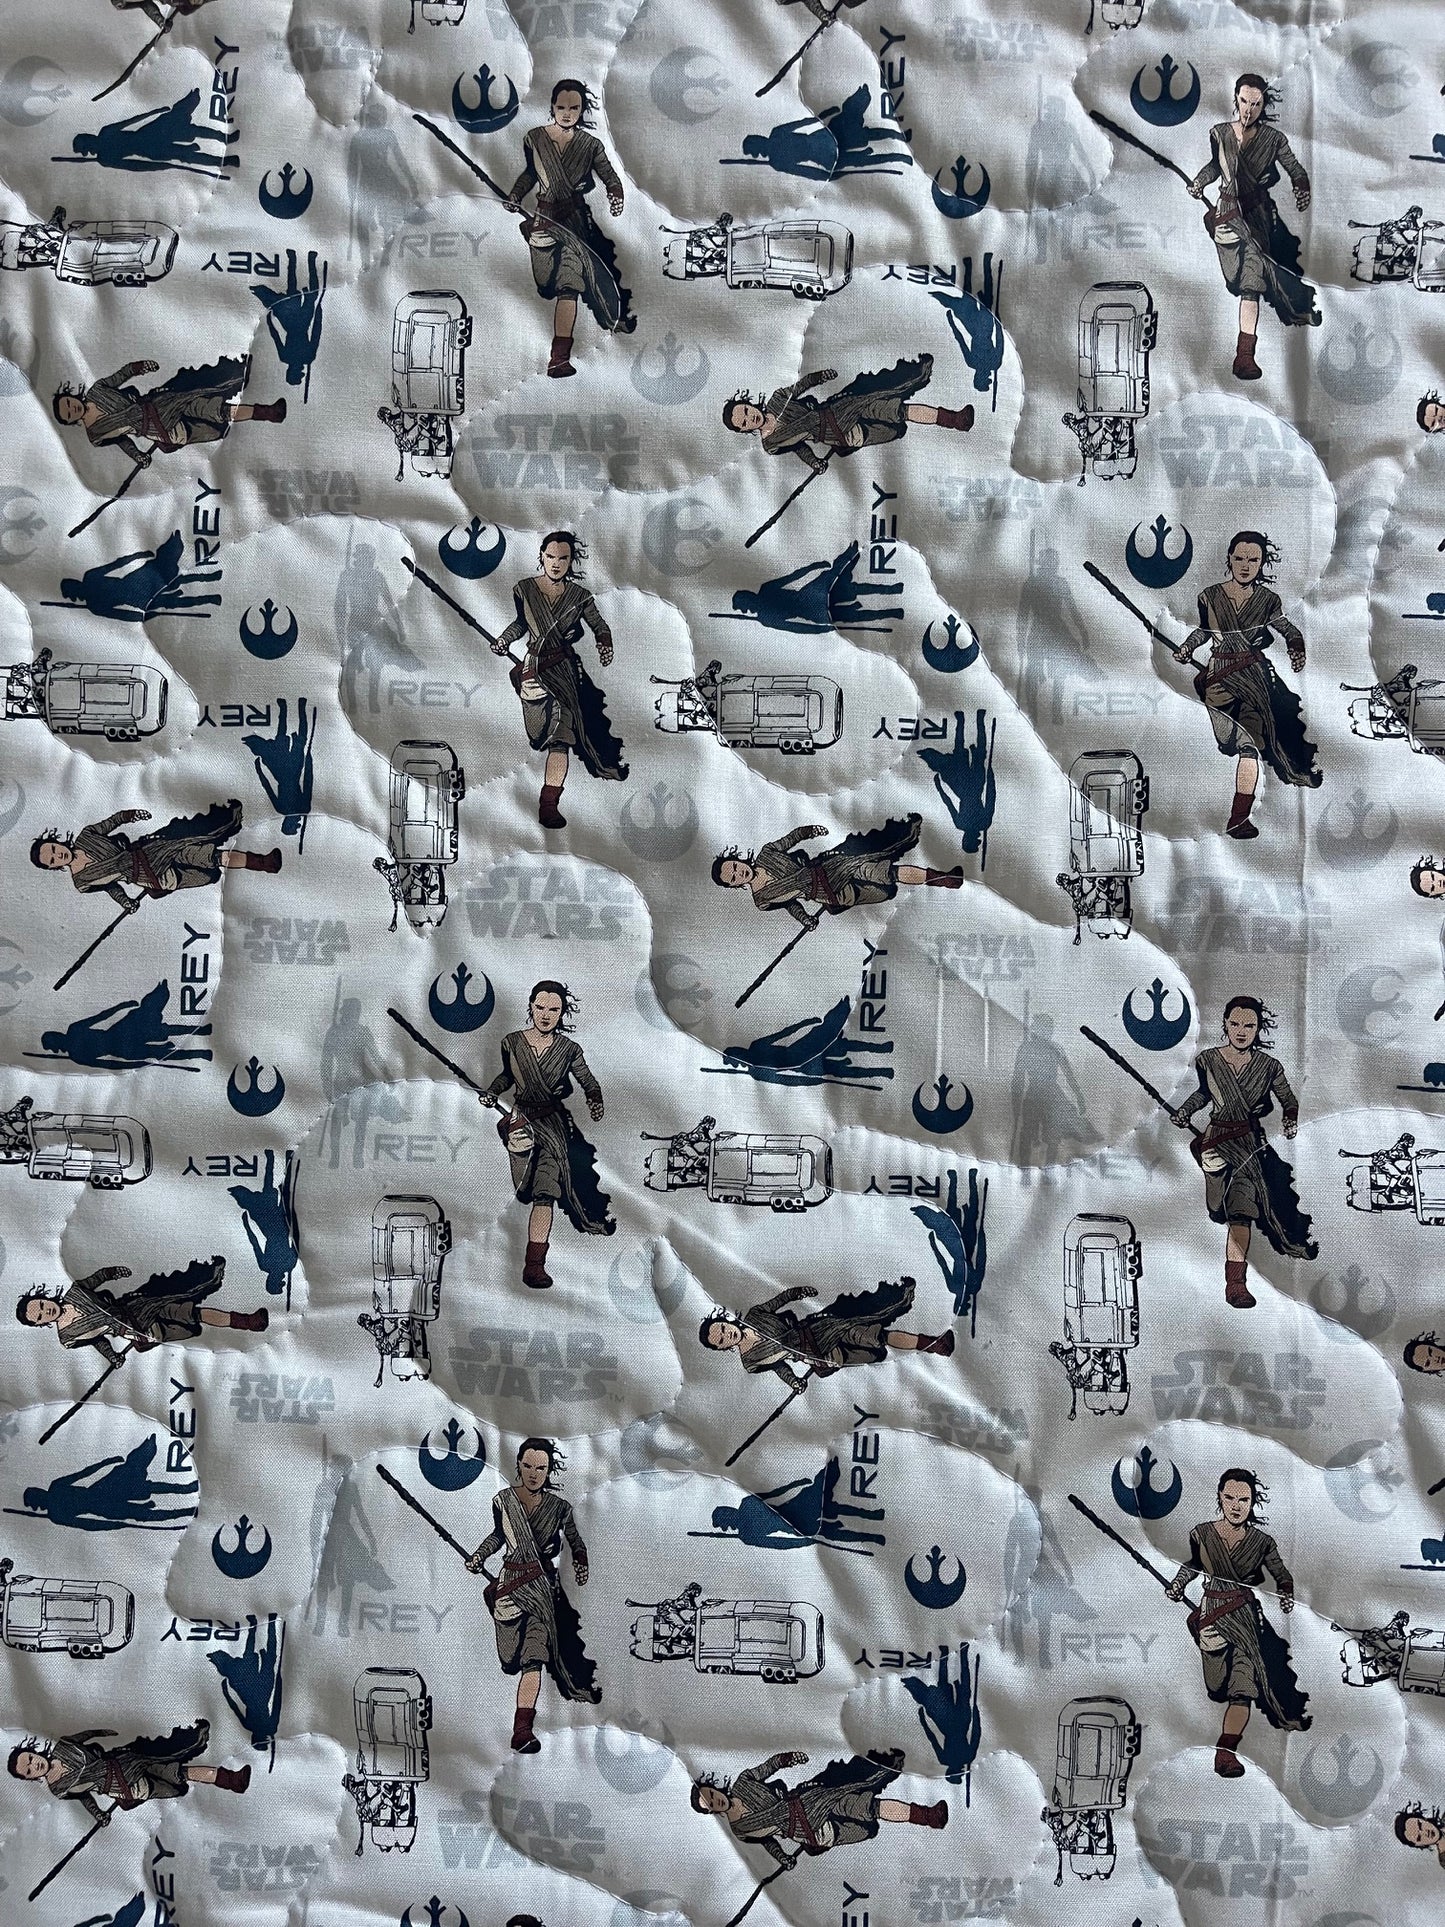 Star Wars Rogue One Rey & BB-8 Heroes inspired Quilted Blanket